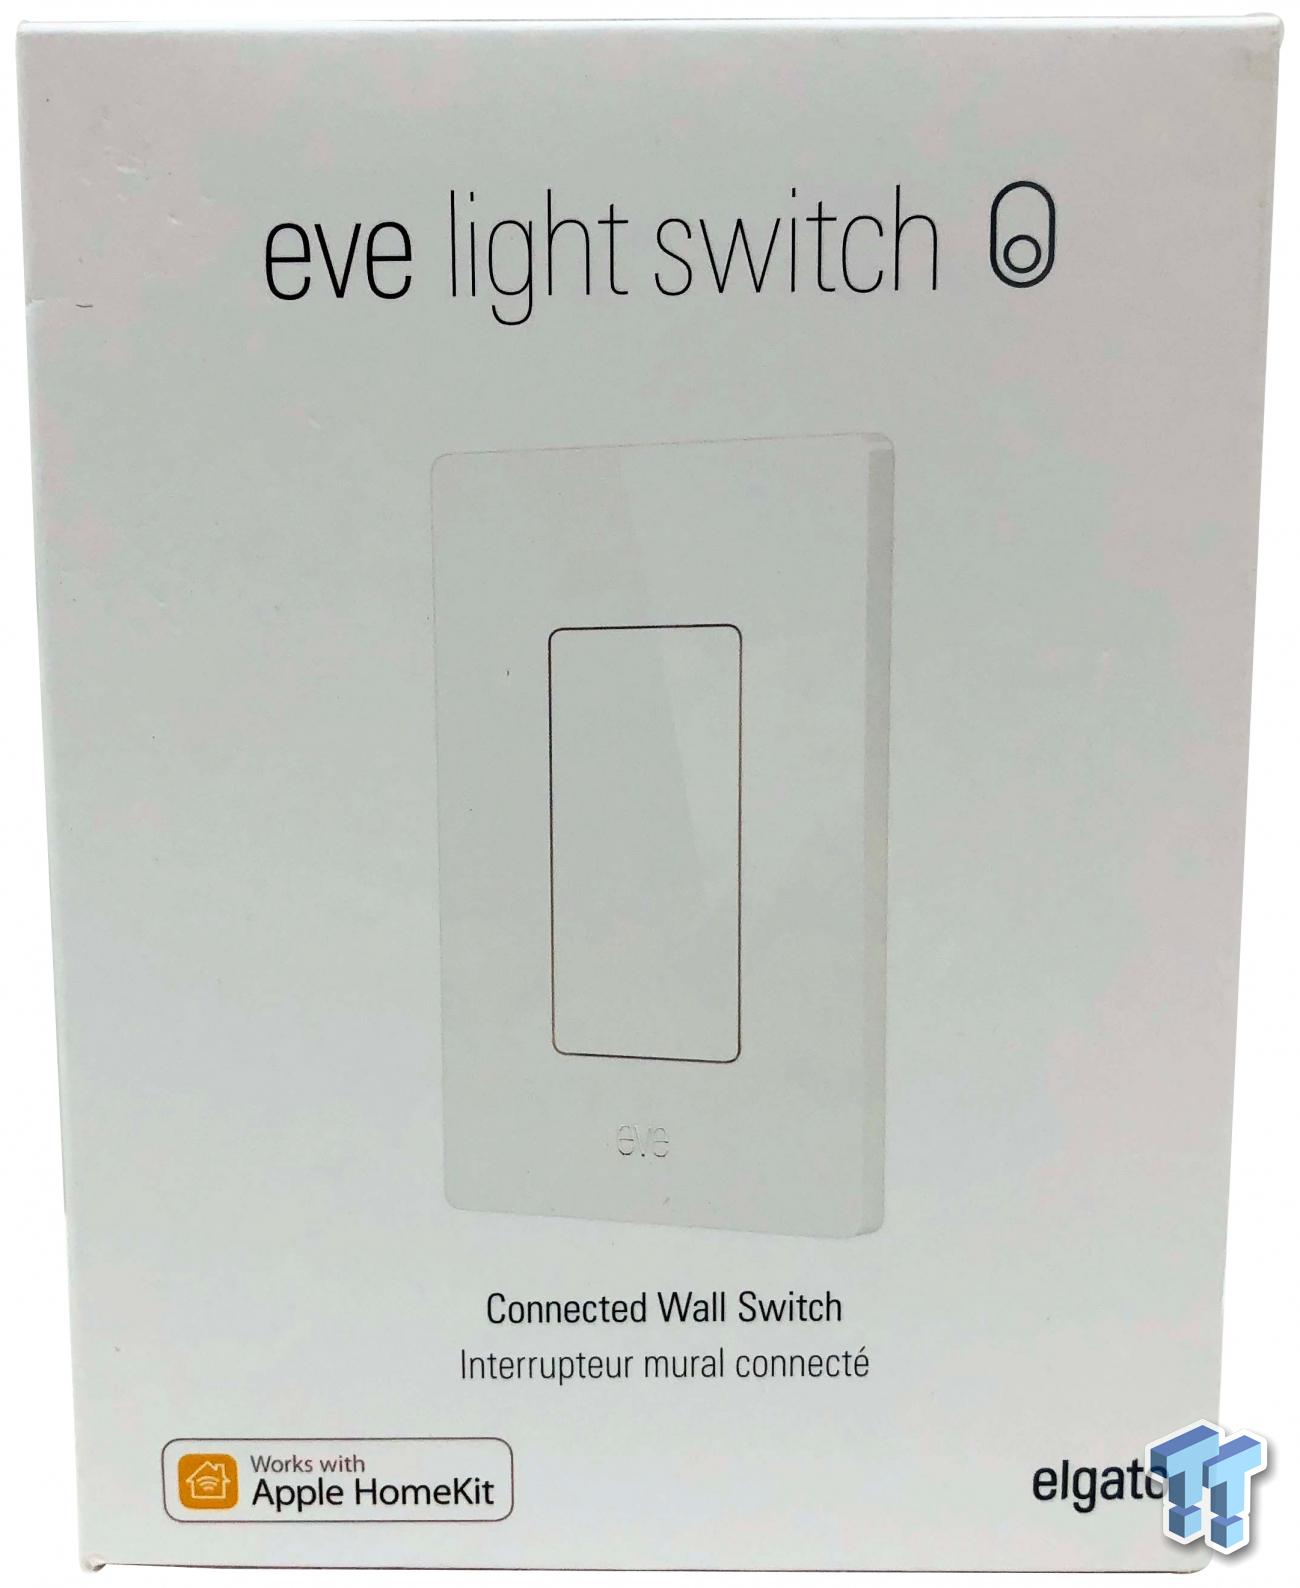 Eve Light Switch - Connected Wall Switch with Apple HomeKit